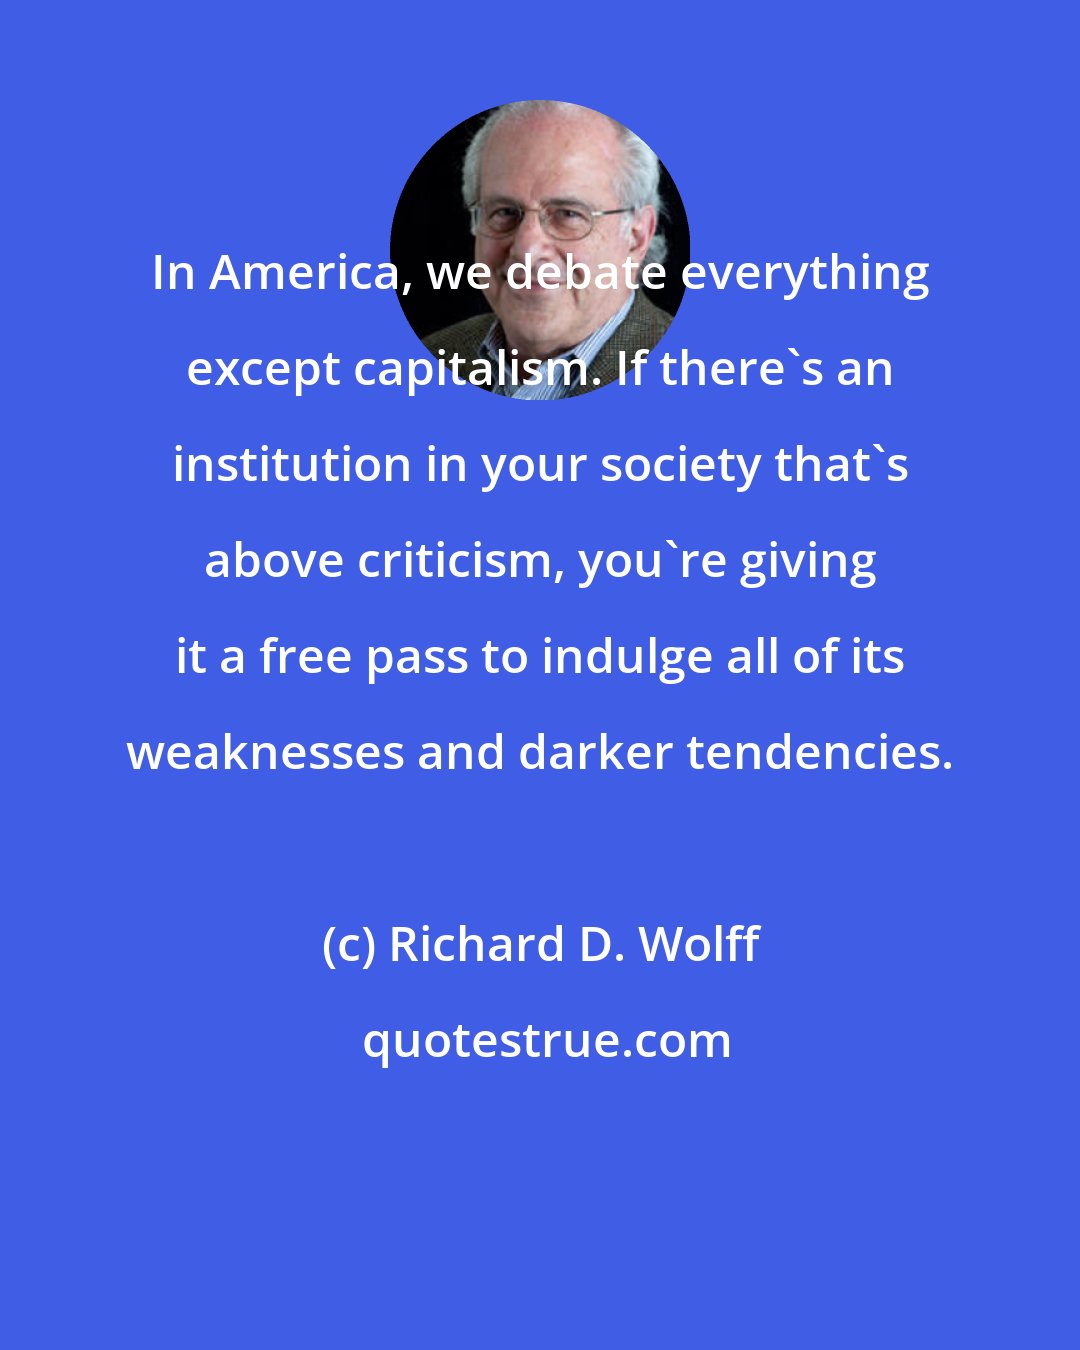 Richard D. Wolff: In America, we debate everything except capitalism. If there's an institution in your society that's above criticism, you're giving it a free pass to indulge all of its weaknesses and darker tendencies.